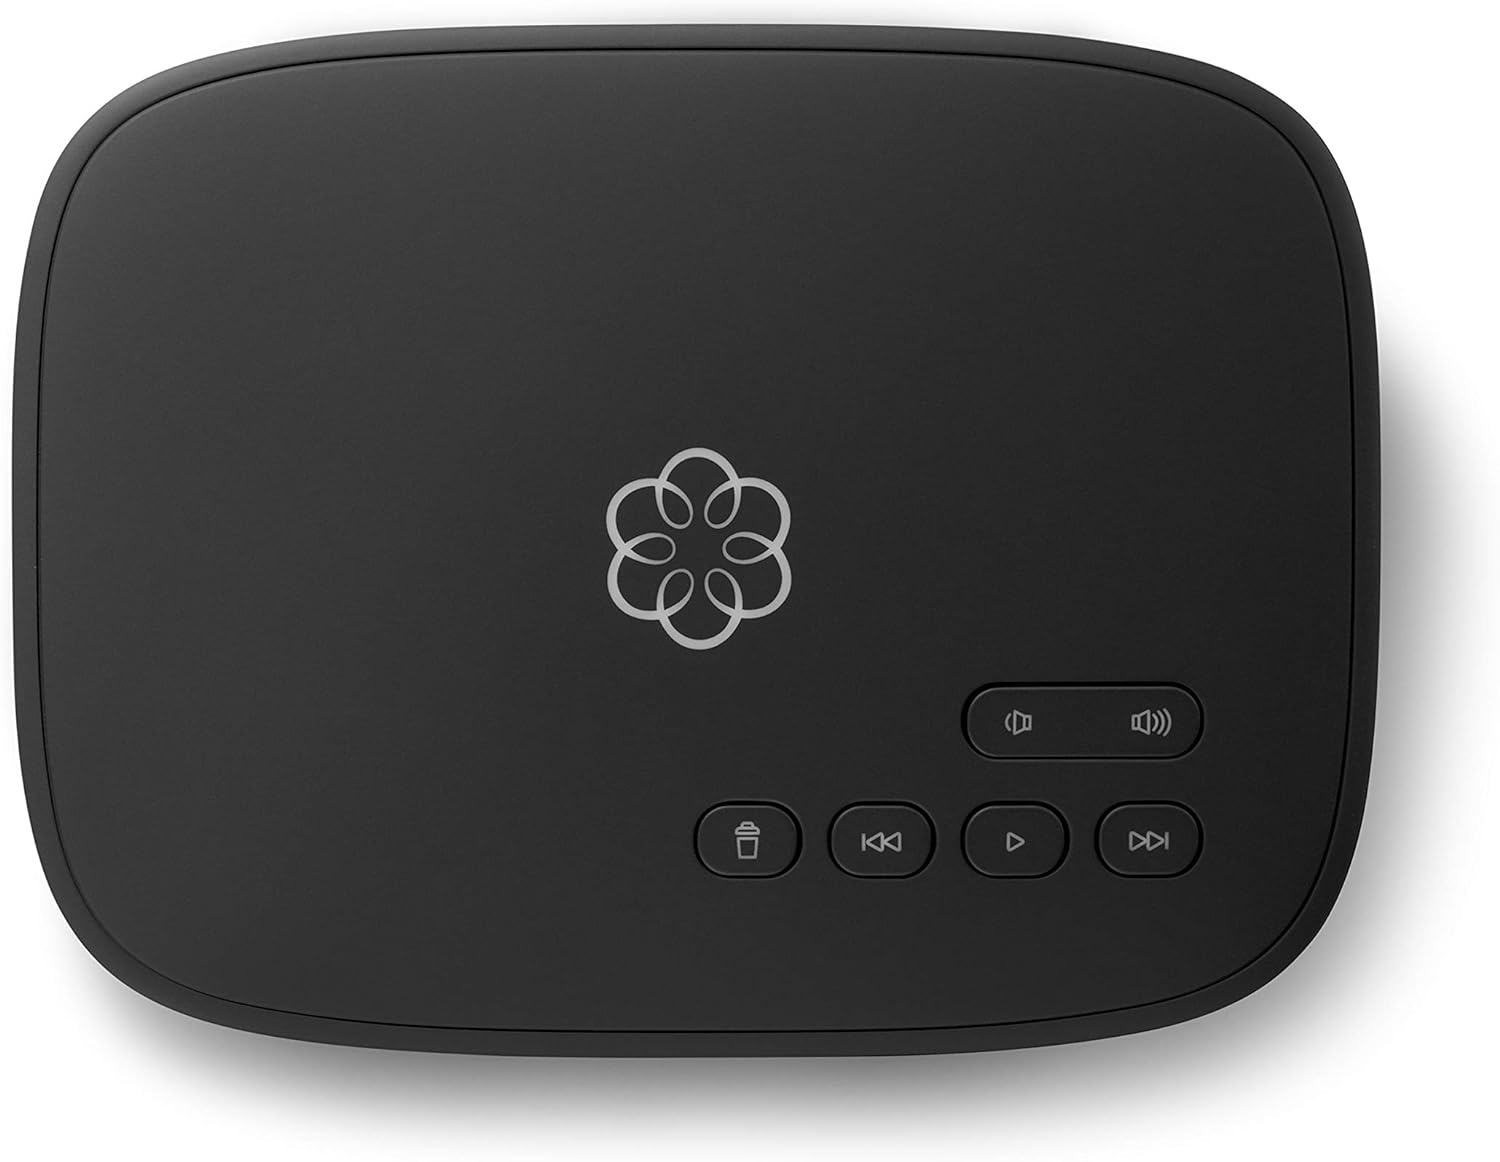 ooma, Inc. Ooma Telo VoIP Free Home Phone Service. Affordable Internet-based landline replacement. Unlimited nationwide calling. Low inter